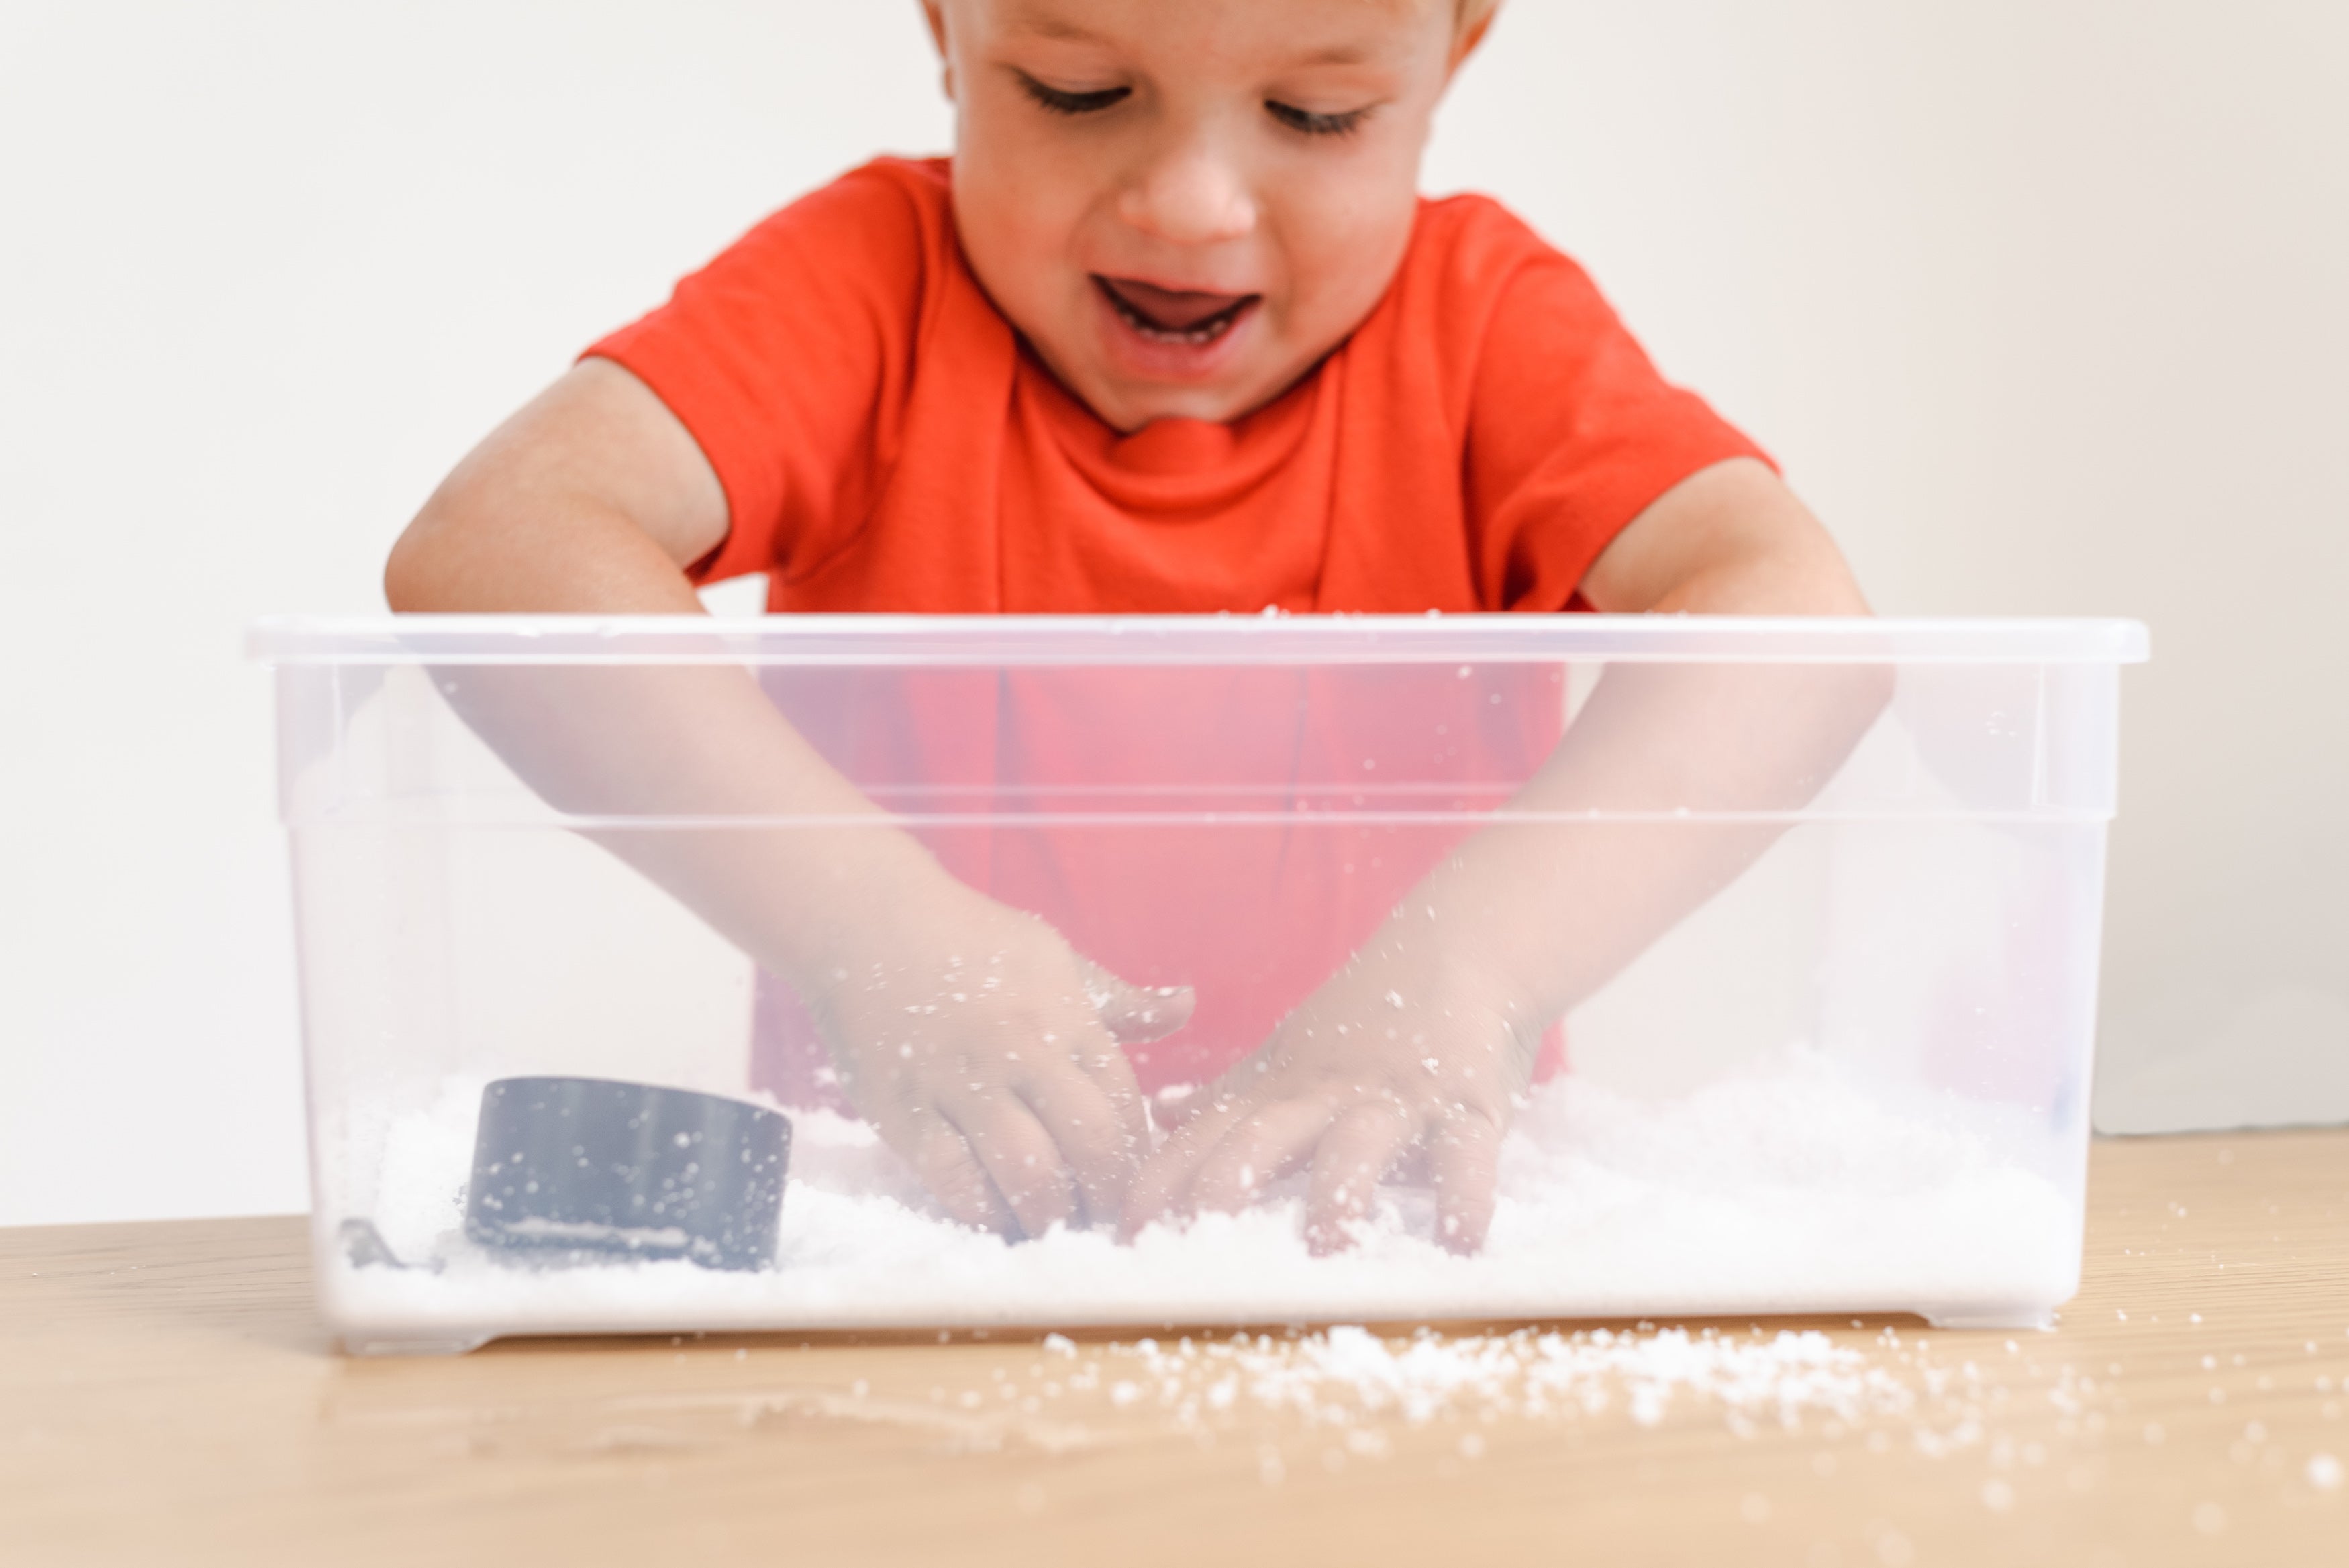 Flake It 'Til You Make It: Decorating with Artificial Snow